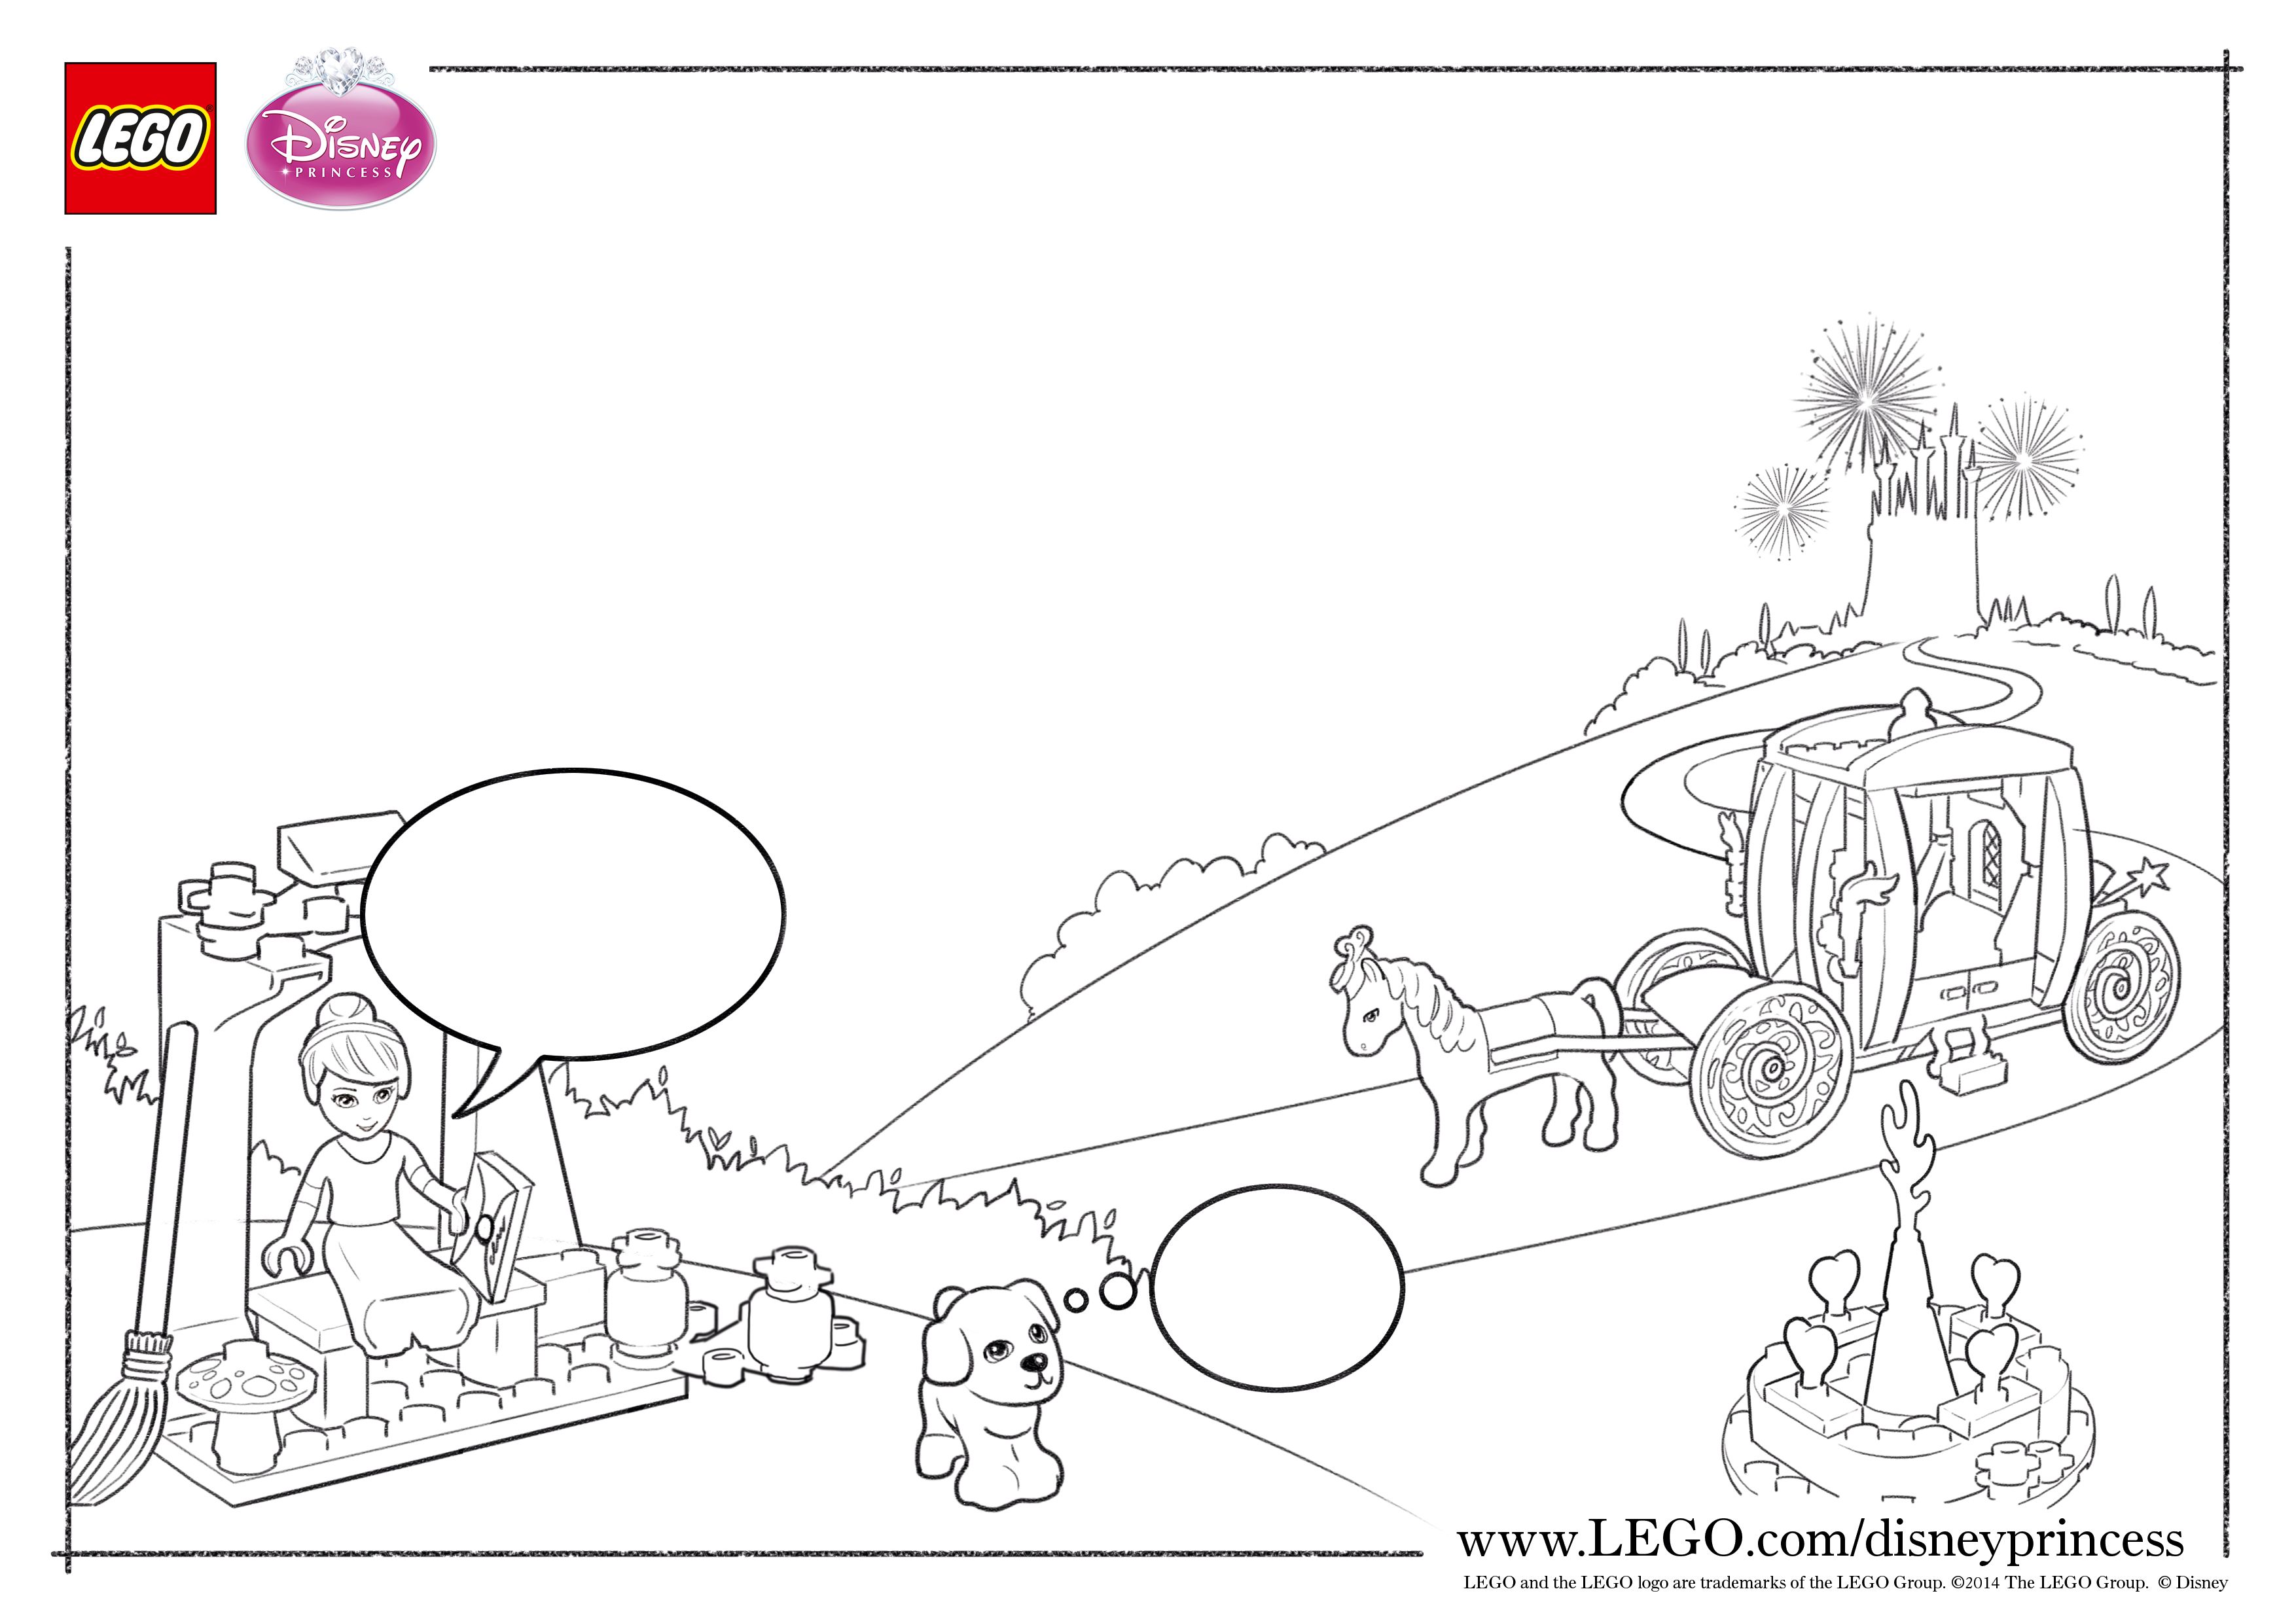 Lego Disney Princesses Coloring Pages - Coloring Home